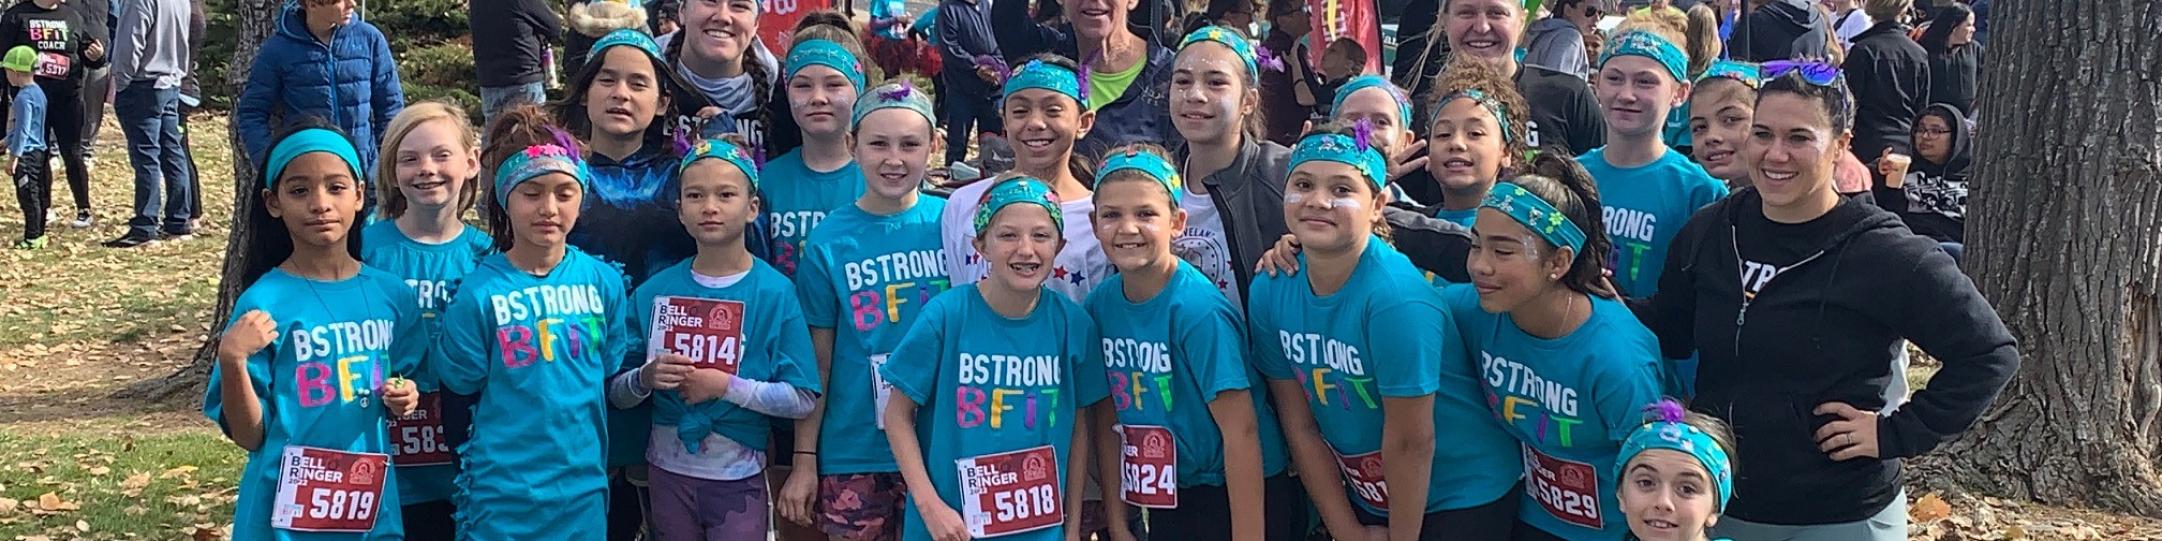 The BStrong BFit Club at their race